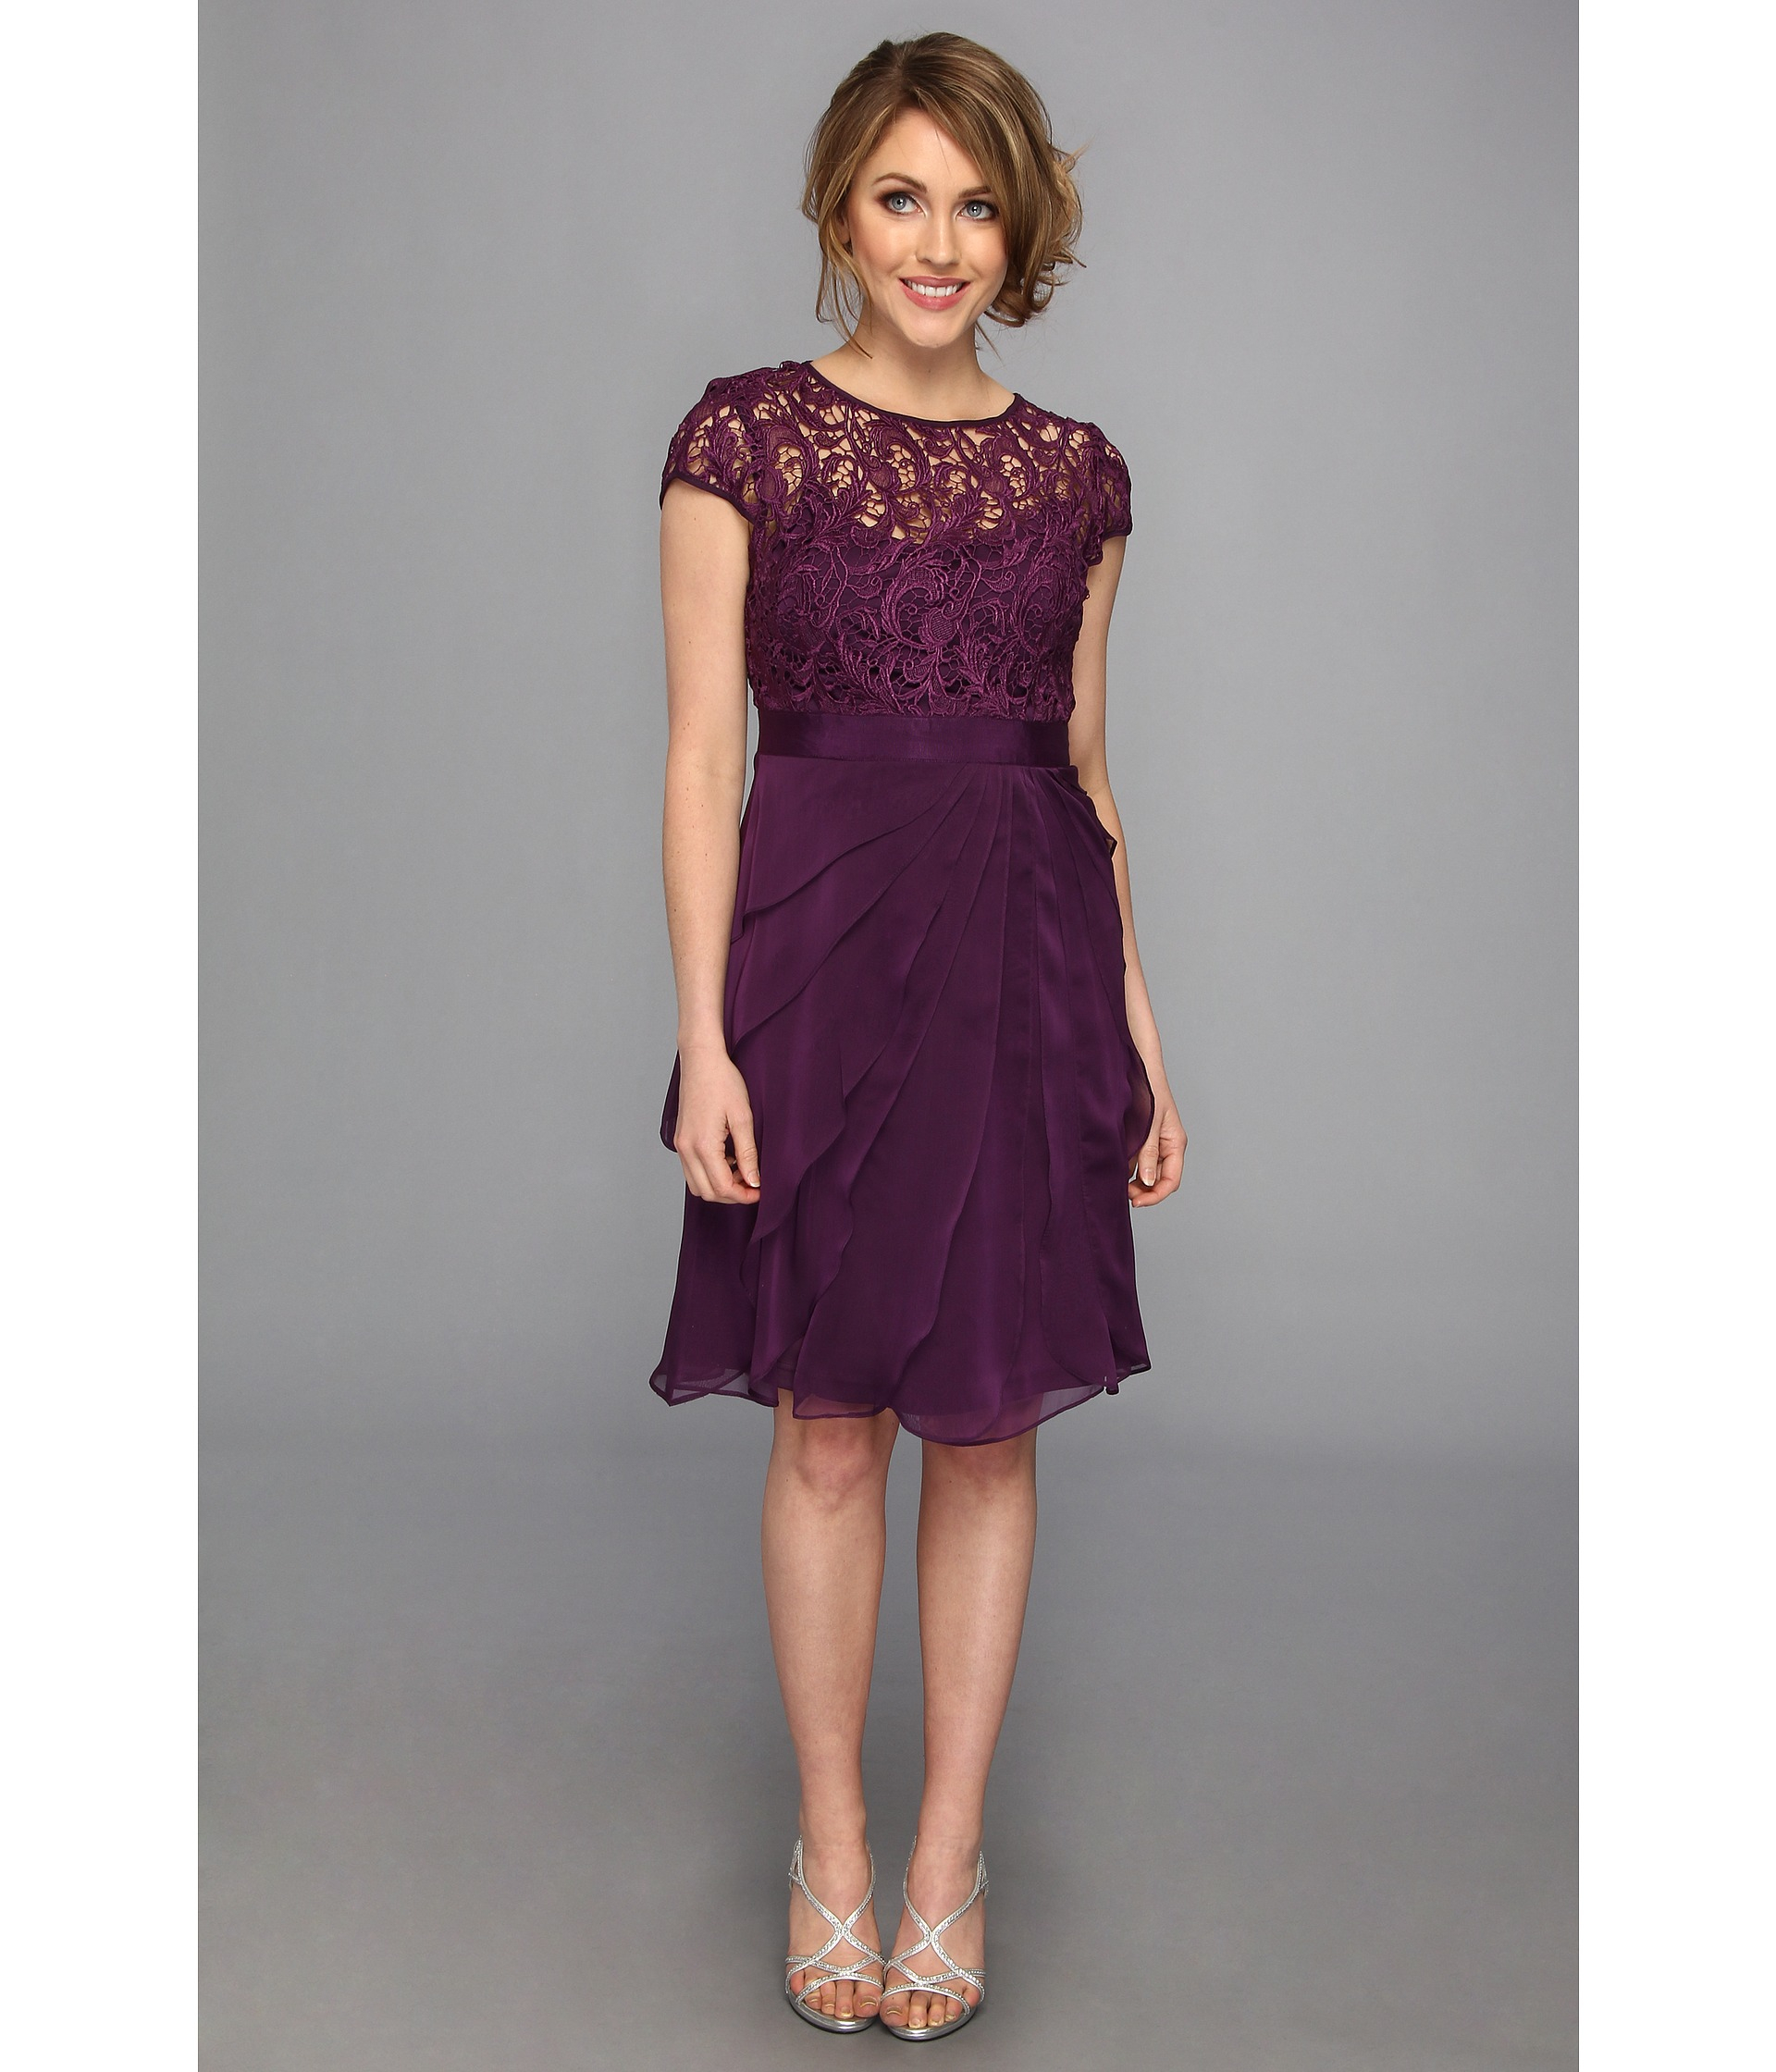 Adrianna Papell Lace Bodice Flutter Skirt Short Dress in Purple - Lyst